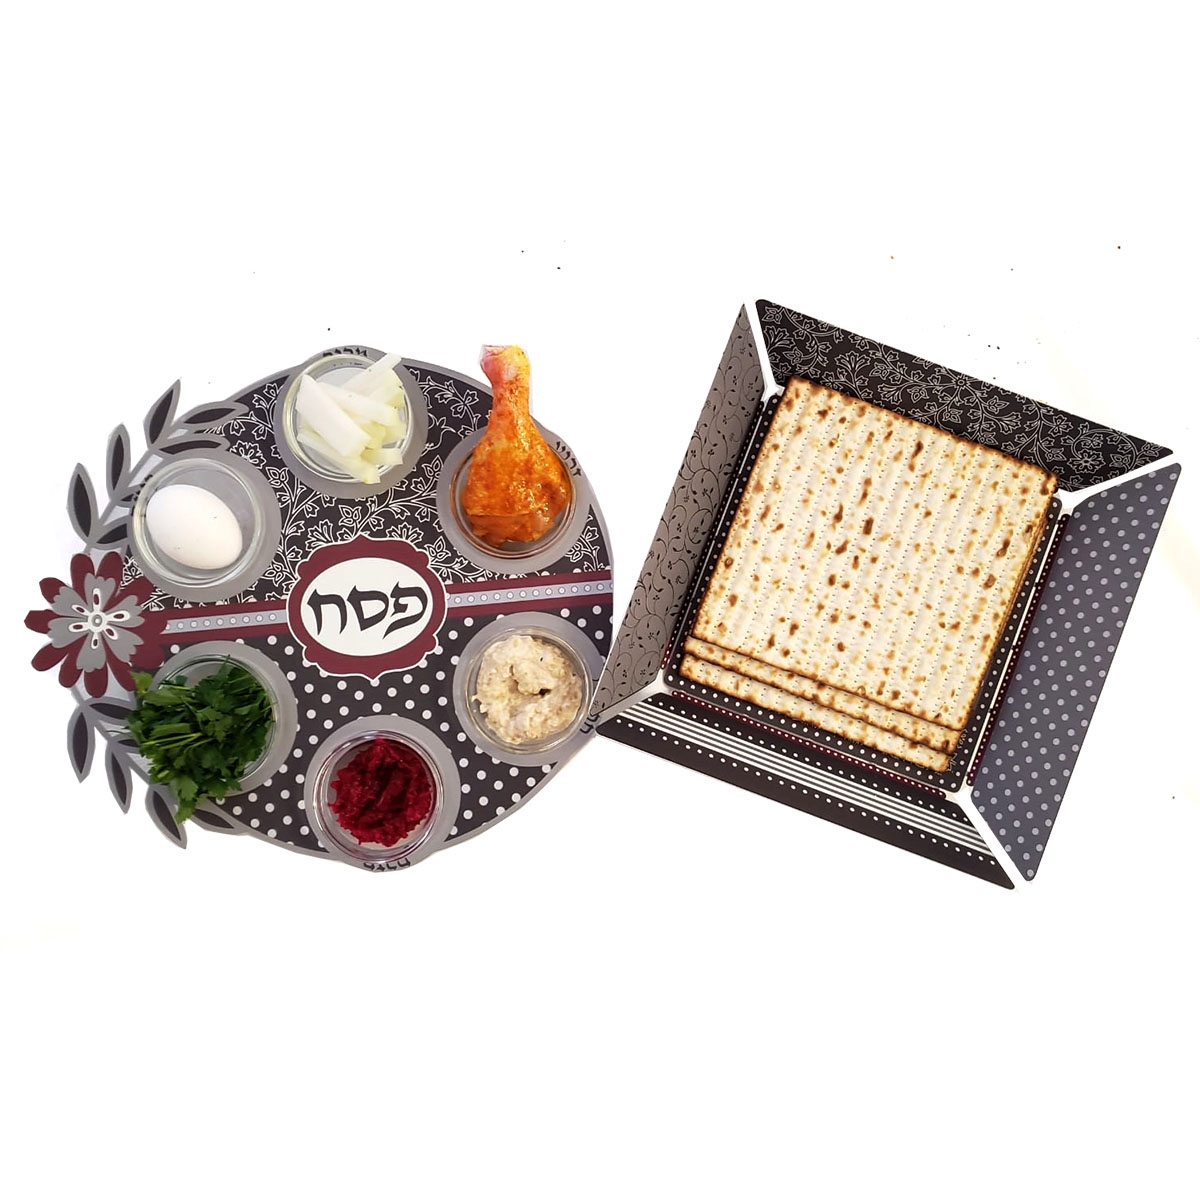 Metal Seder Plate and Matzah Tray Set By Dorit Judaica – Floral and Polka Dots Design - 1